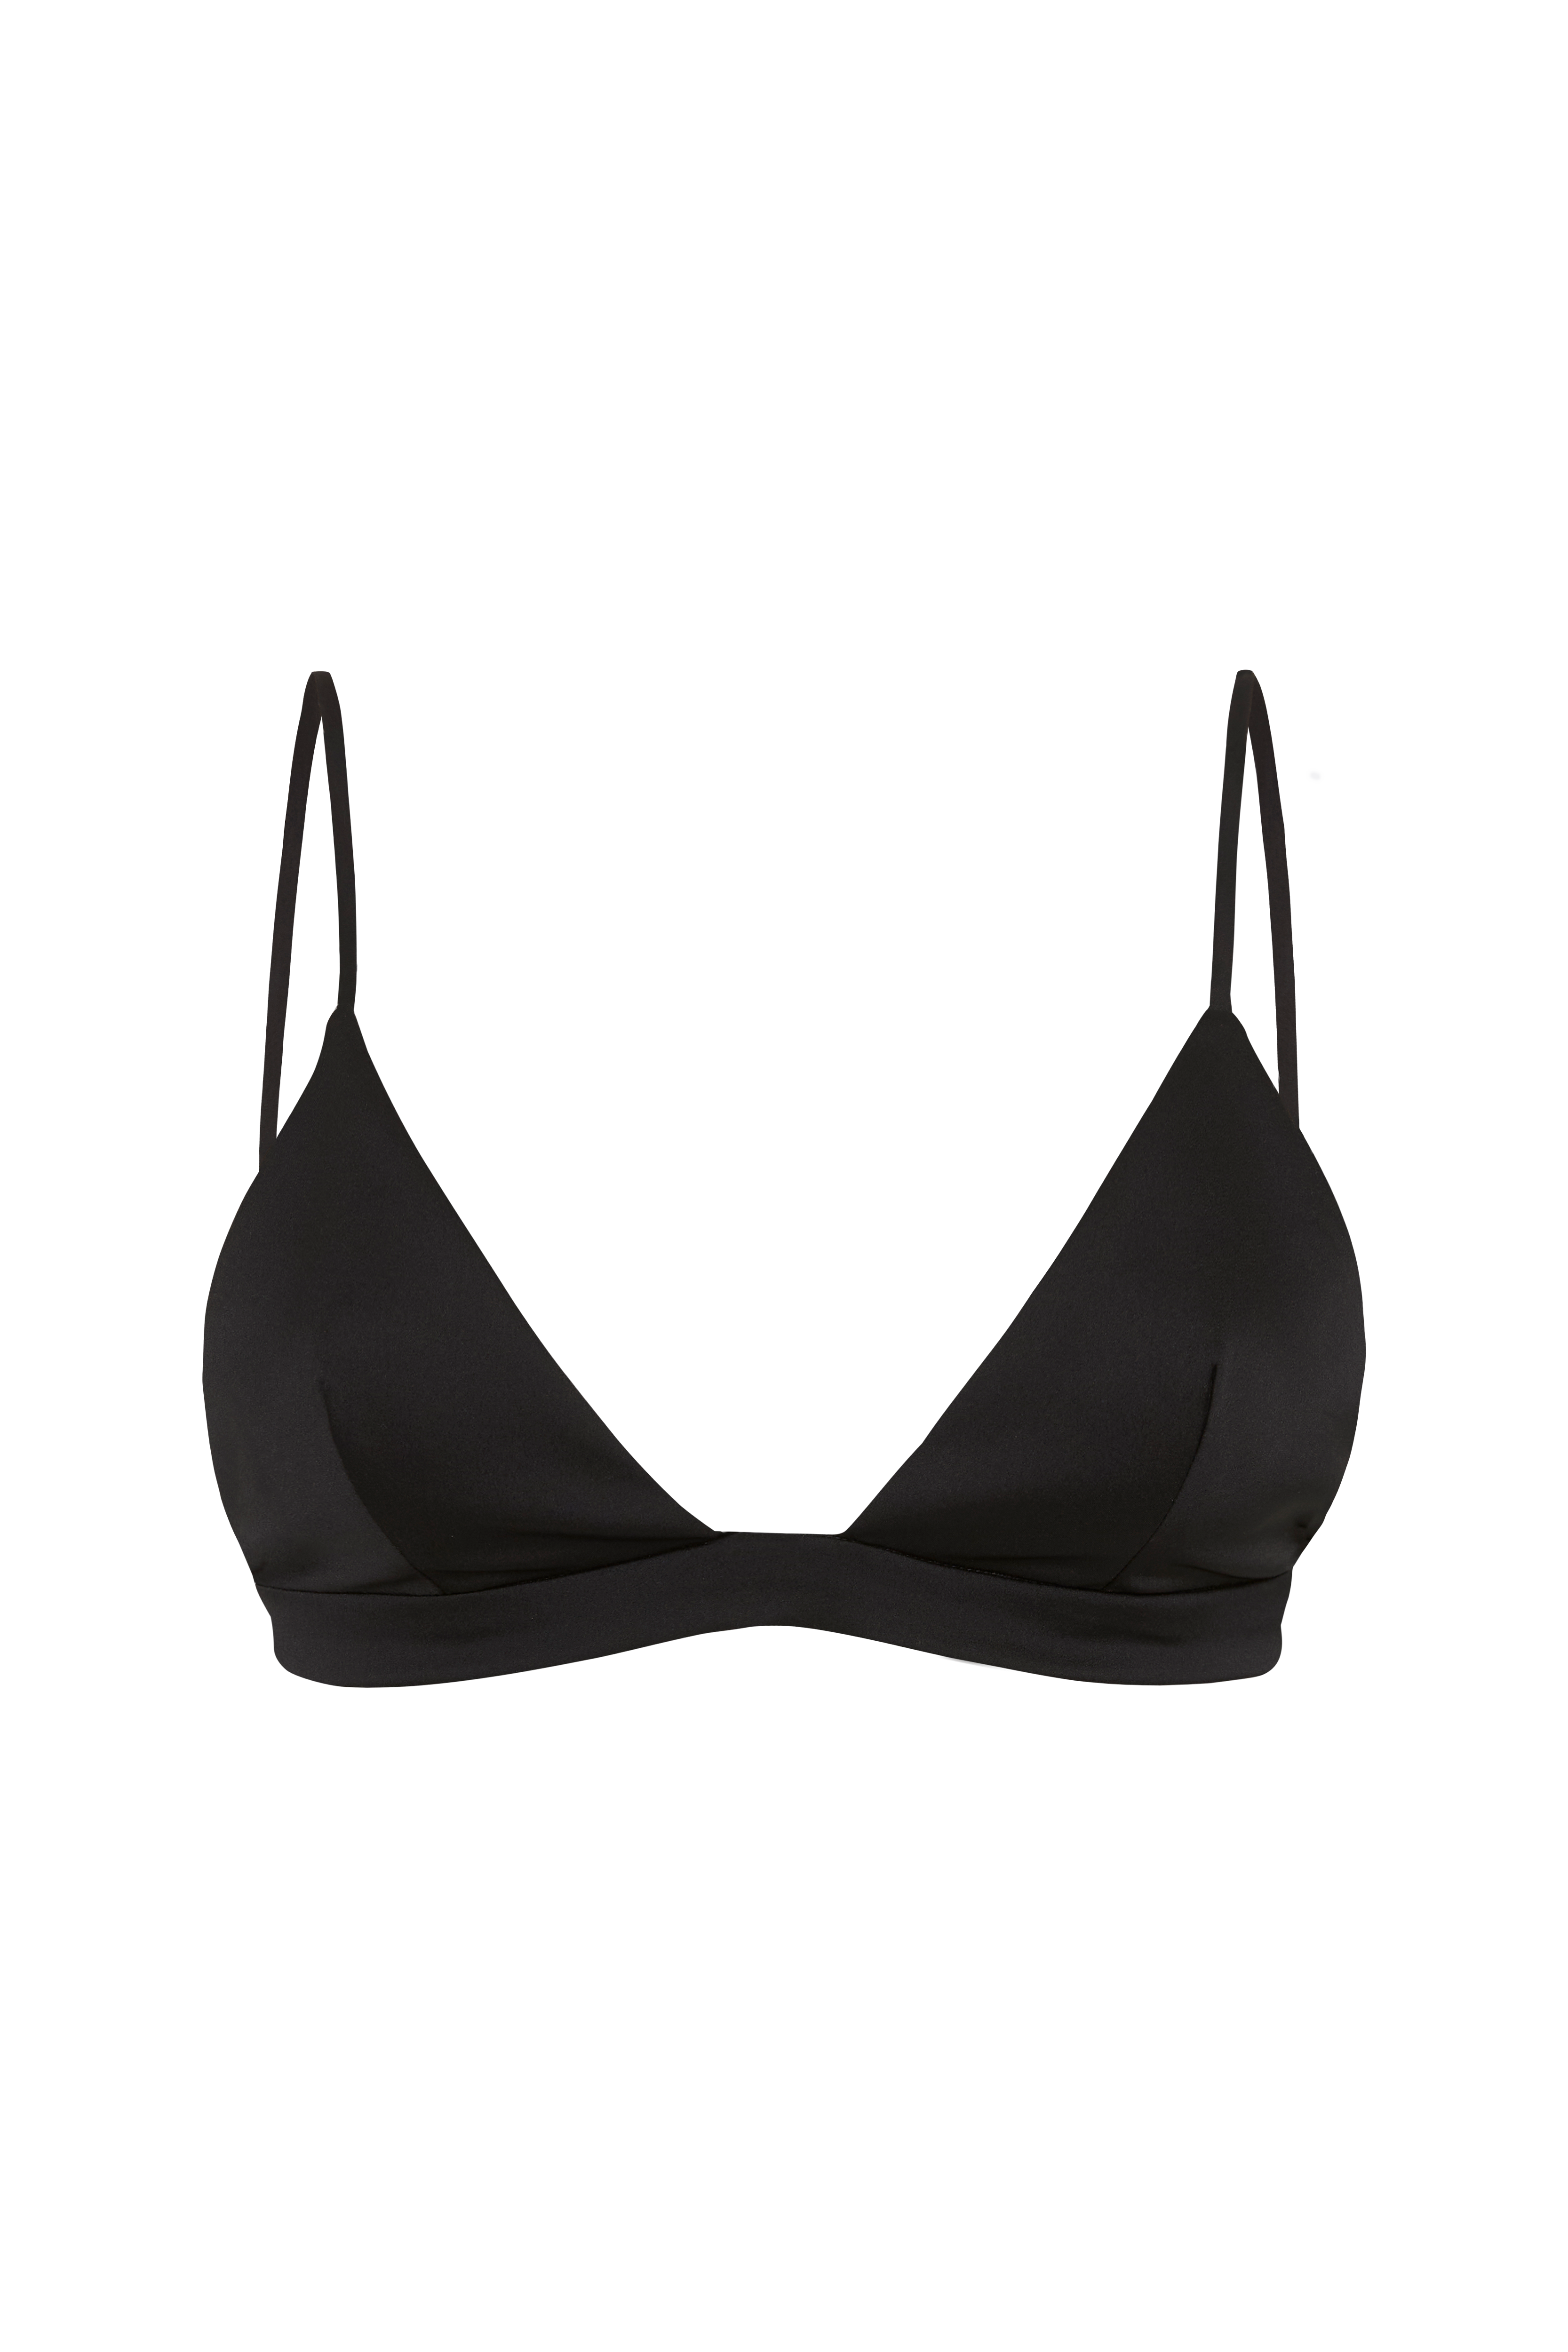 Face to Face Bralette - Off-White - MANNING CARTELL